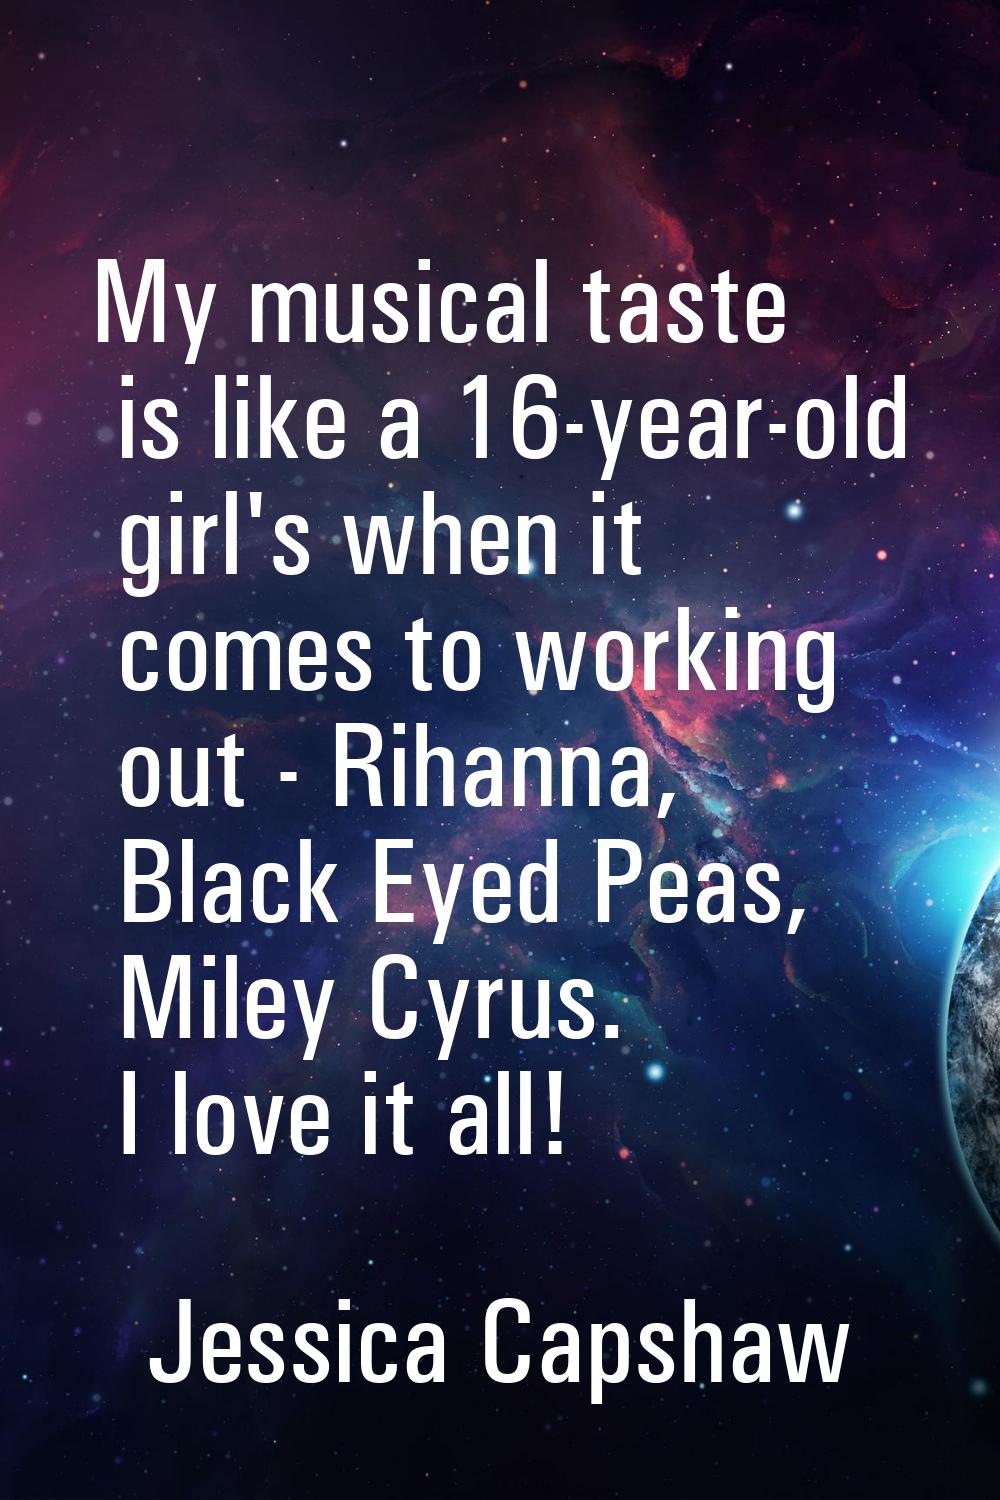 My musical taste is like a 16-year-old girl's when it comes to working out - Rihanna, Black Eyed Pe